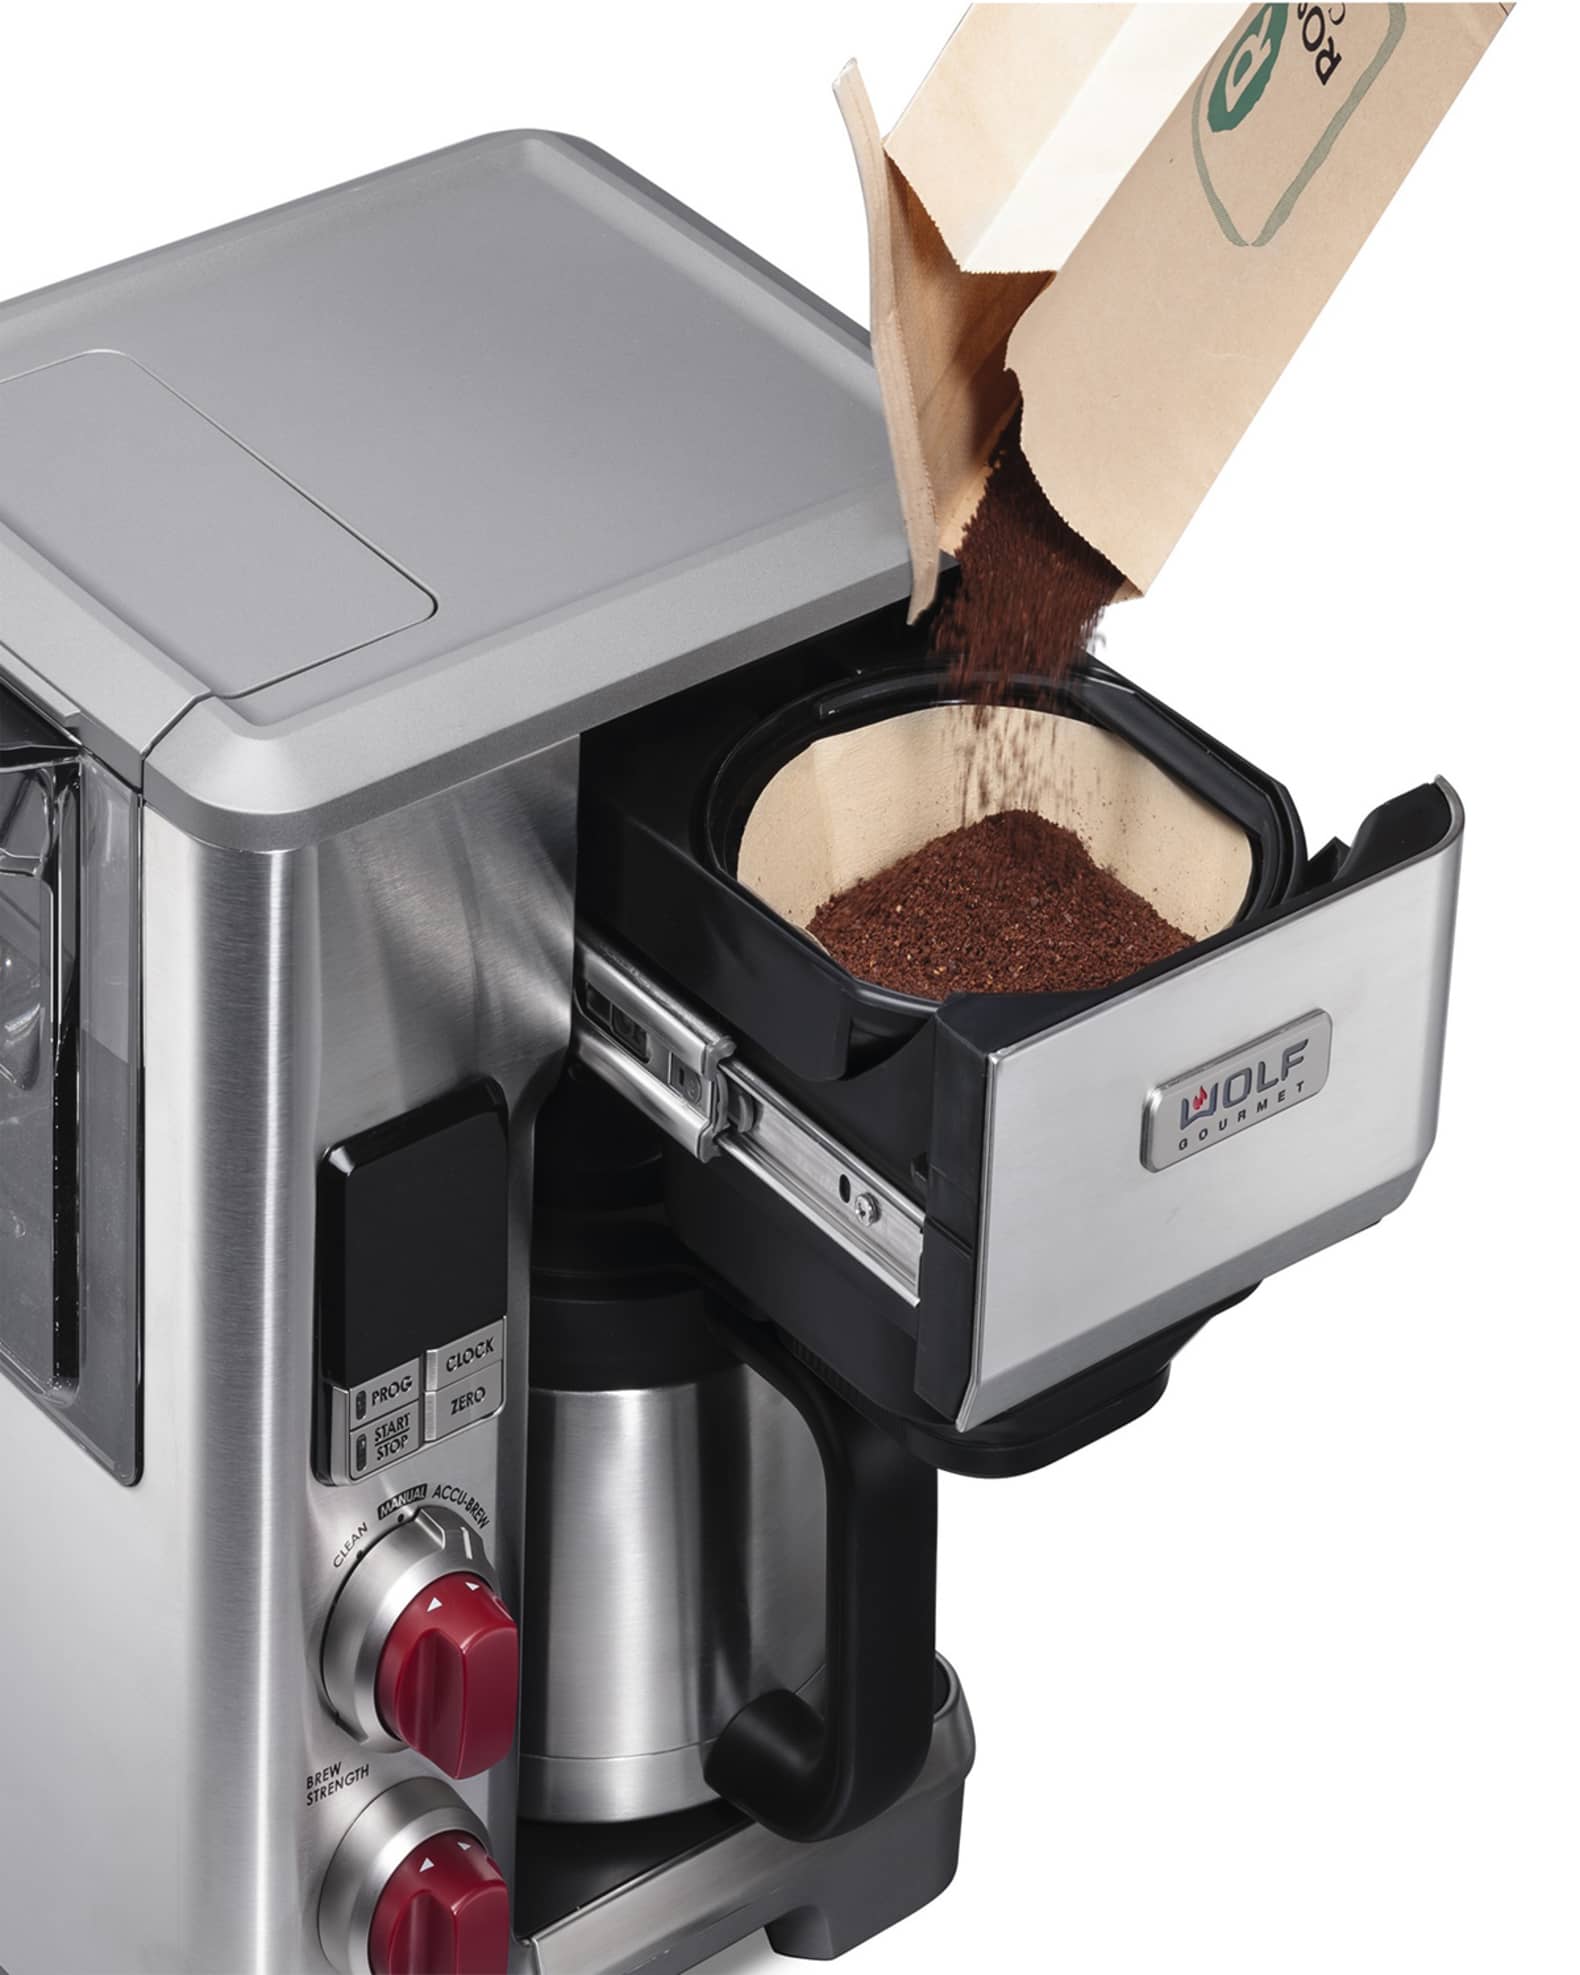 Wolf gourmet coffee maker - appliances - by owner - sale - craigslist